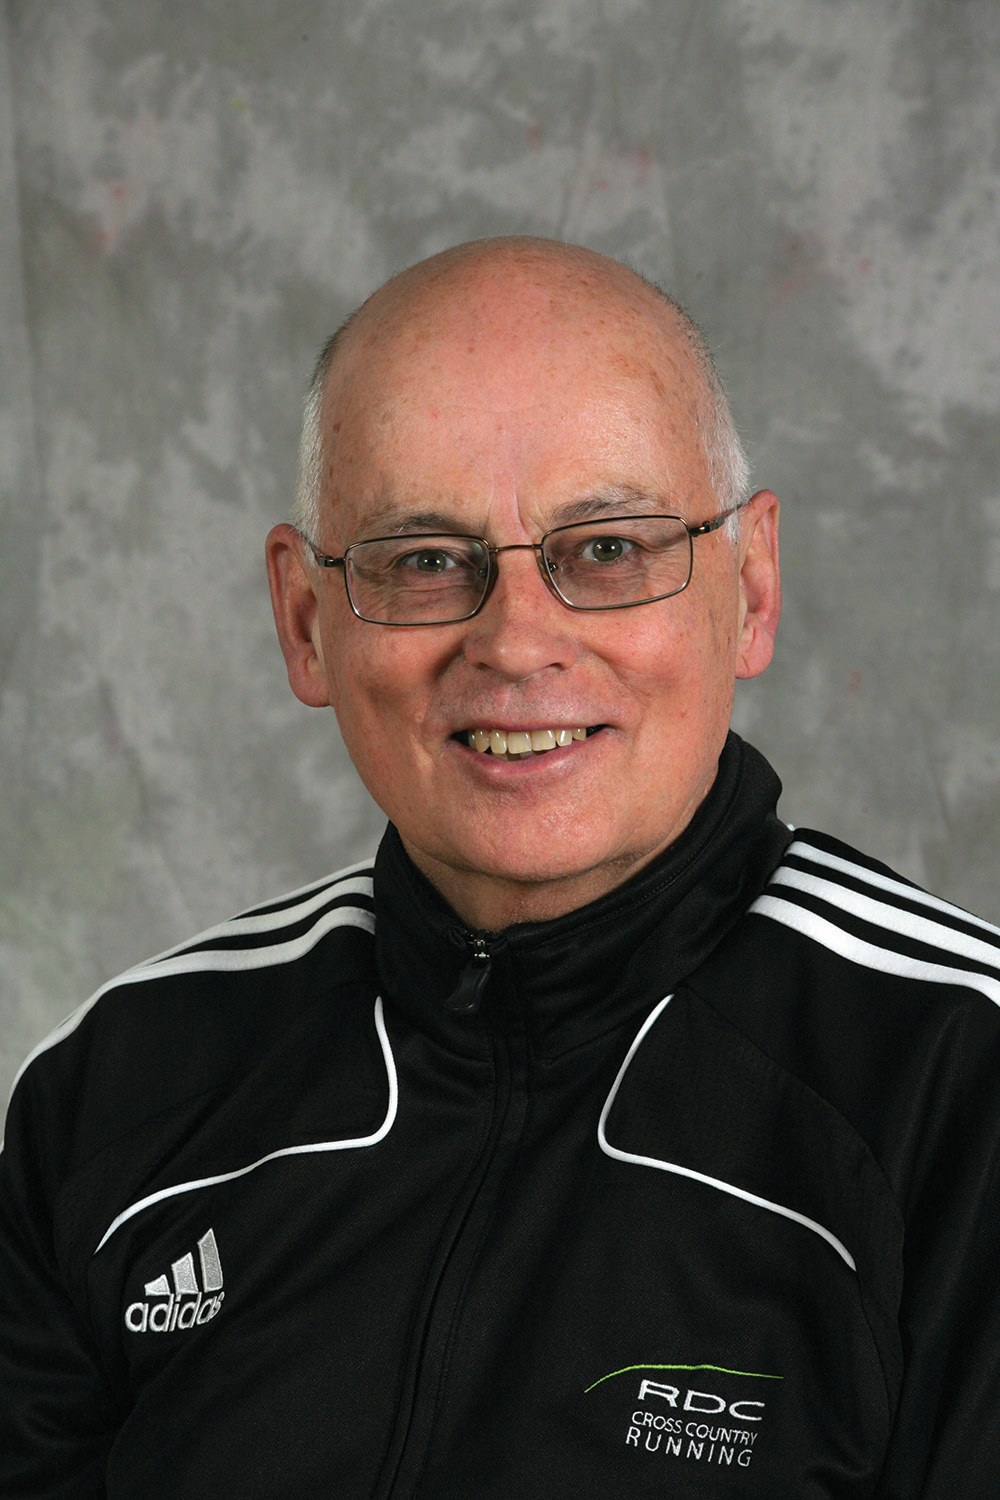 FINISHING STRONG- Long-time RDC Cross Country running Coach Brian Stackhouse was presented with the 2016 CCAA Coaching Excellence Award in a special ceremony